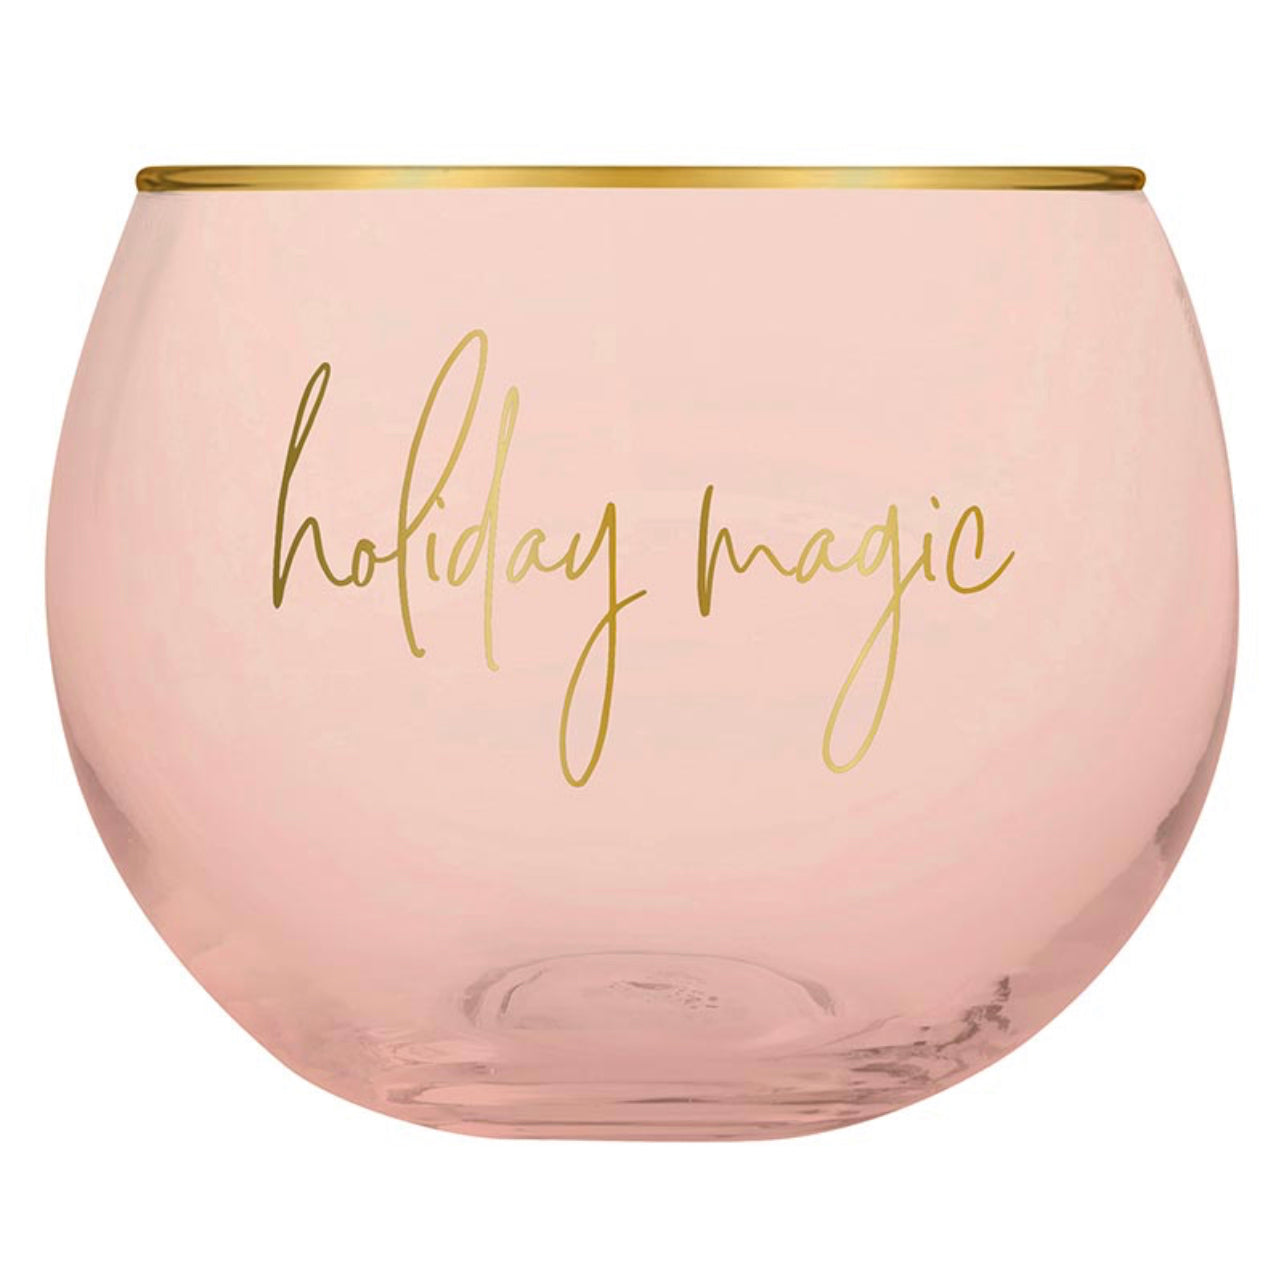 petite round cocktail glass in a blush color with a gold rim and gold script that reads "holiday magic"